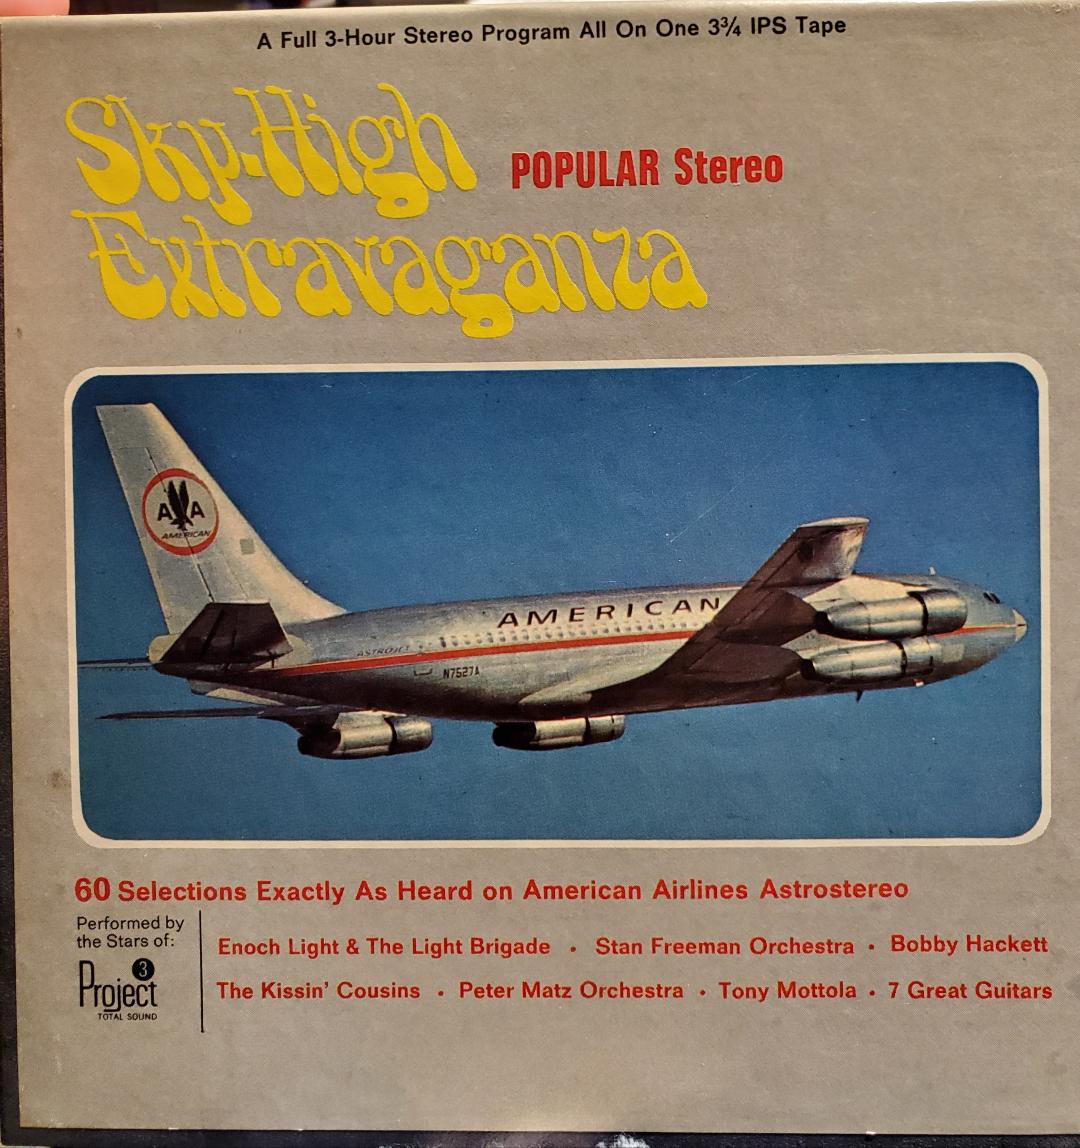 Art for Chattanooga Choo Choo by Peter Matz Orchestra // American Airlines Popular Program Vol 39 (Single)